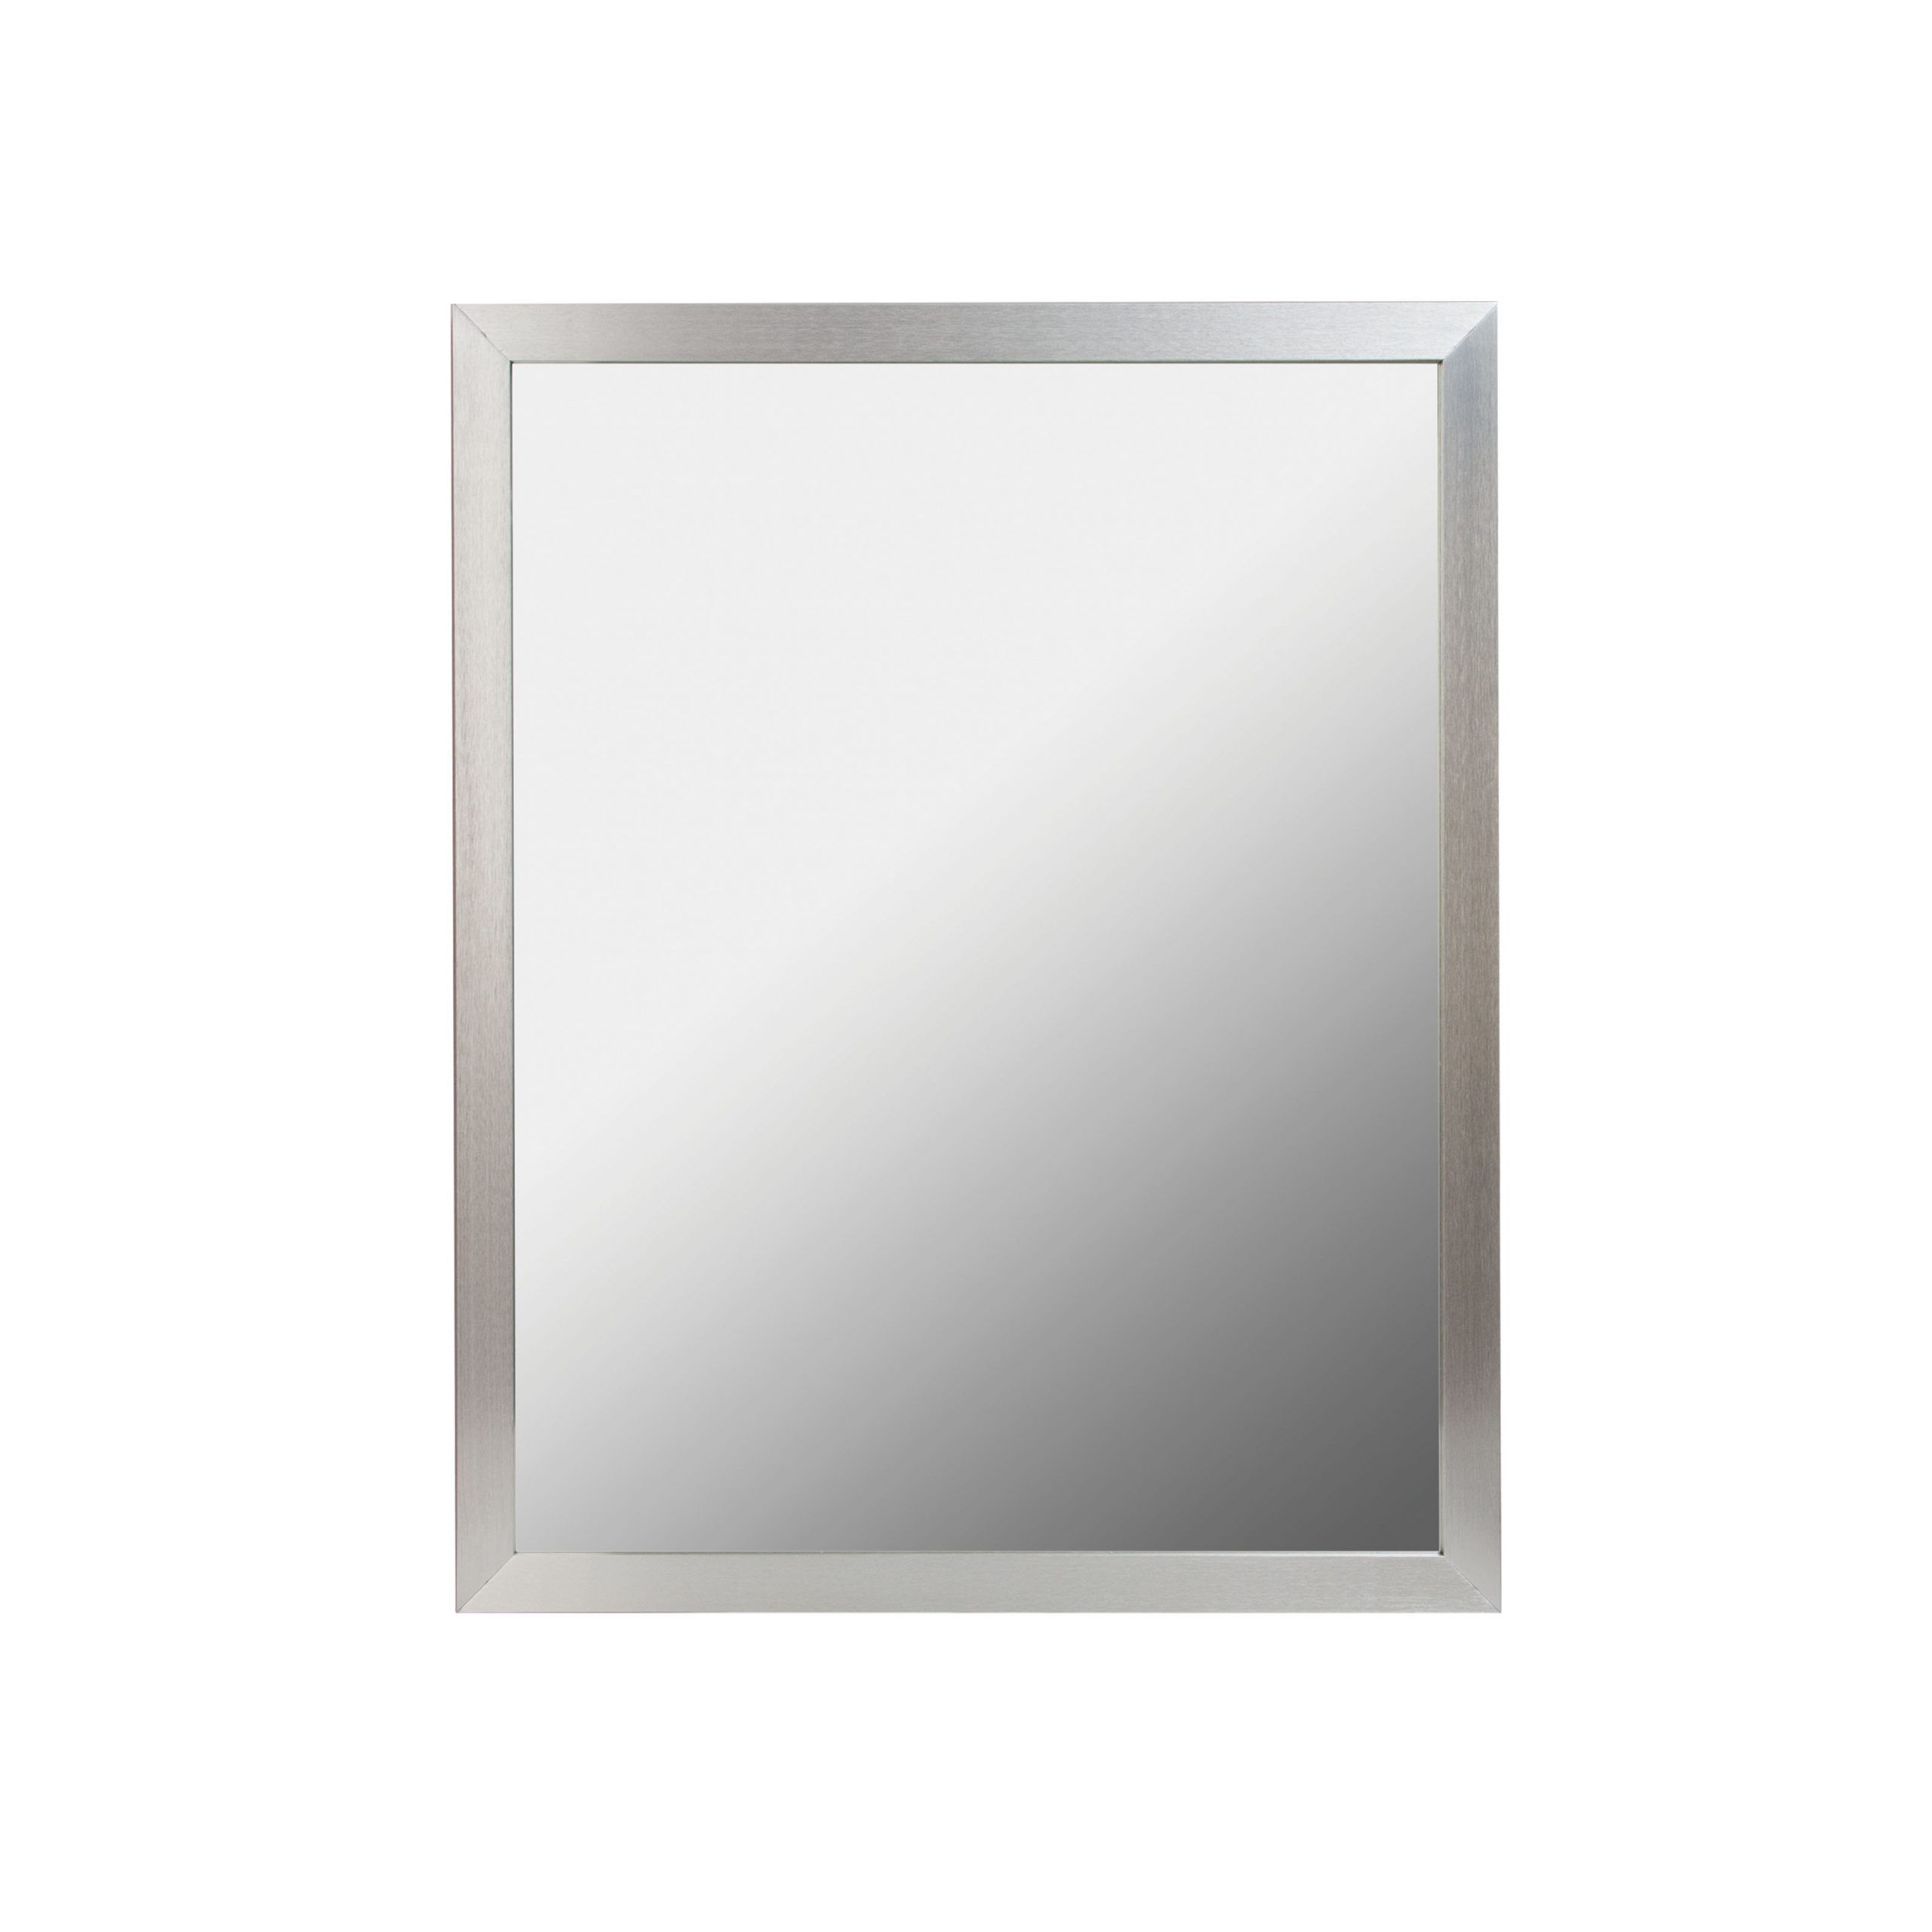 24x30 Aluminum Framed Mirror In Brushed Nickel – Foremost Bath Throughout Brushed Nickel Octagon Mirrors (View 3 of 15)